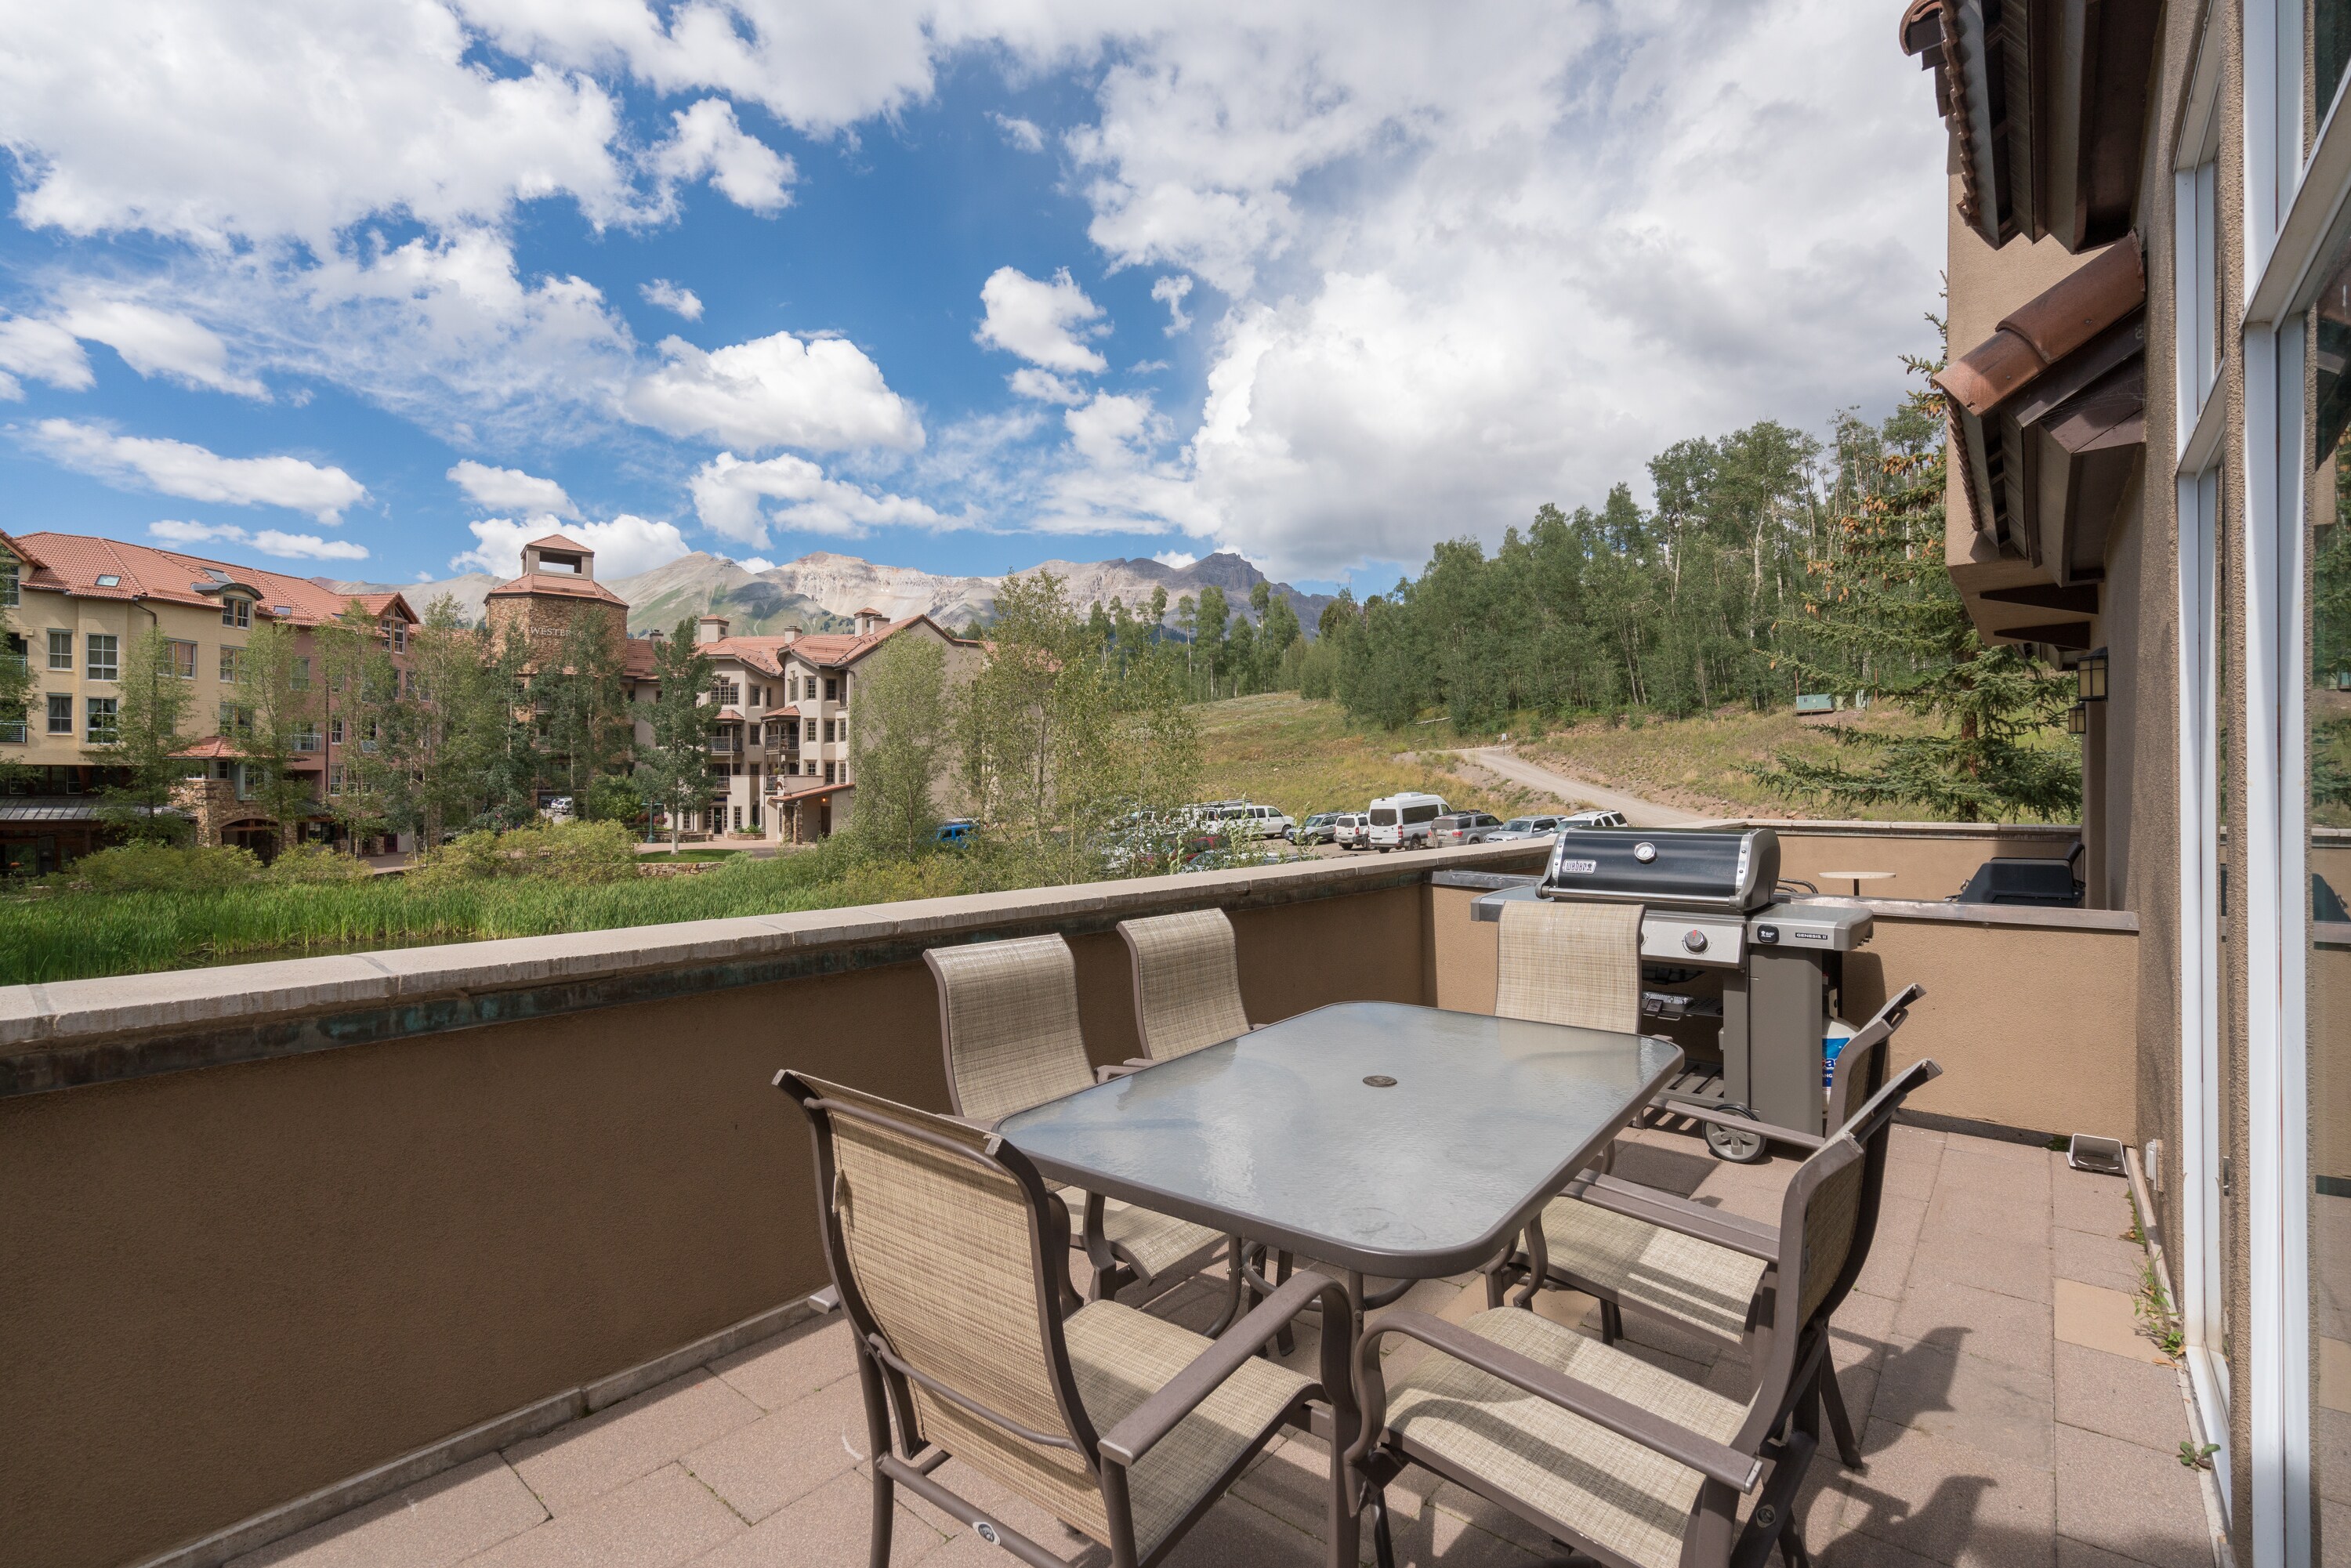 Condo features a balcony with a grill, outdoor dining table, and breathtaking views.